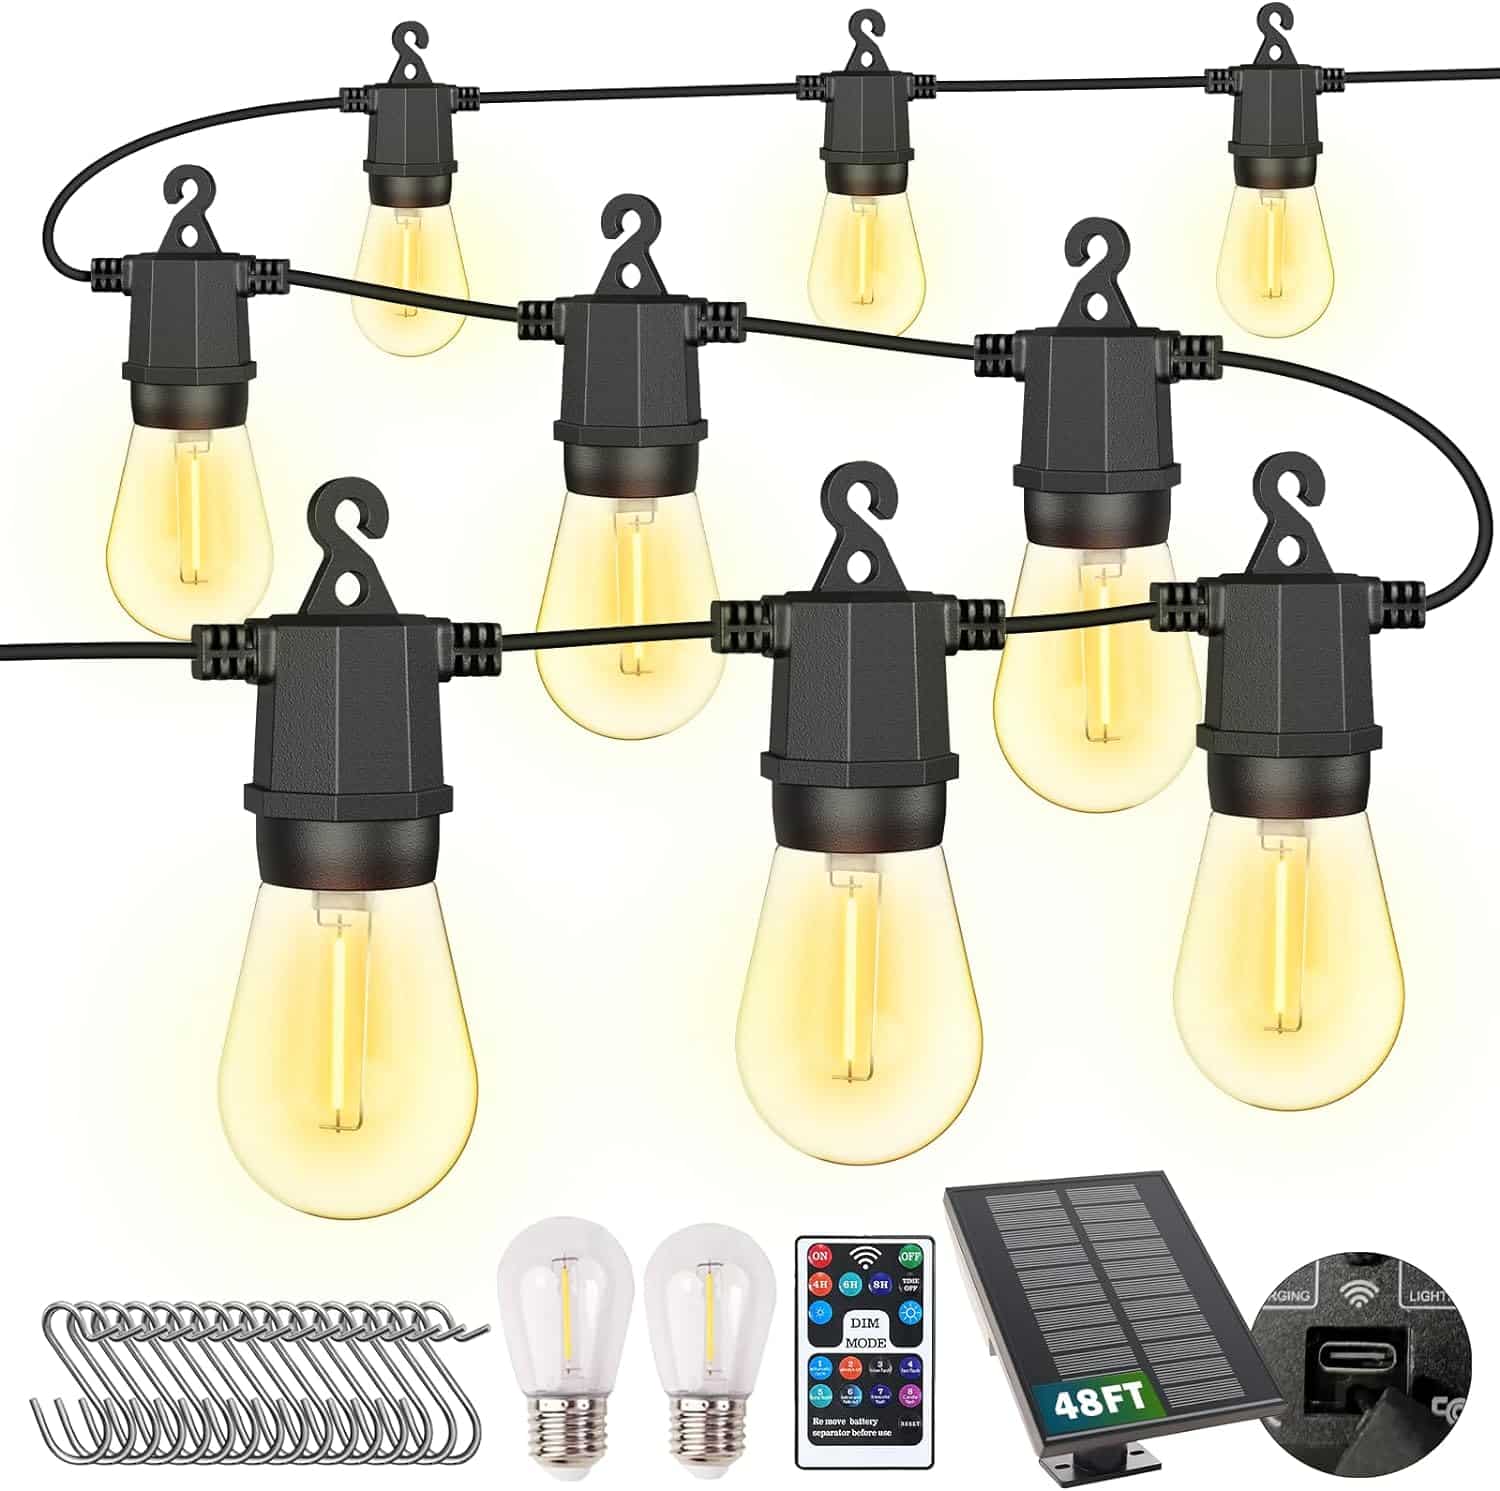 CIIC Solar Outdoor String Lights, 48FT LED Patio Lights Solar Powered for Outside IP65 Waterproof, String Lights with 8 Modes 16+2 Shatterproof Bulbs for Party Decor-Warm White